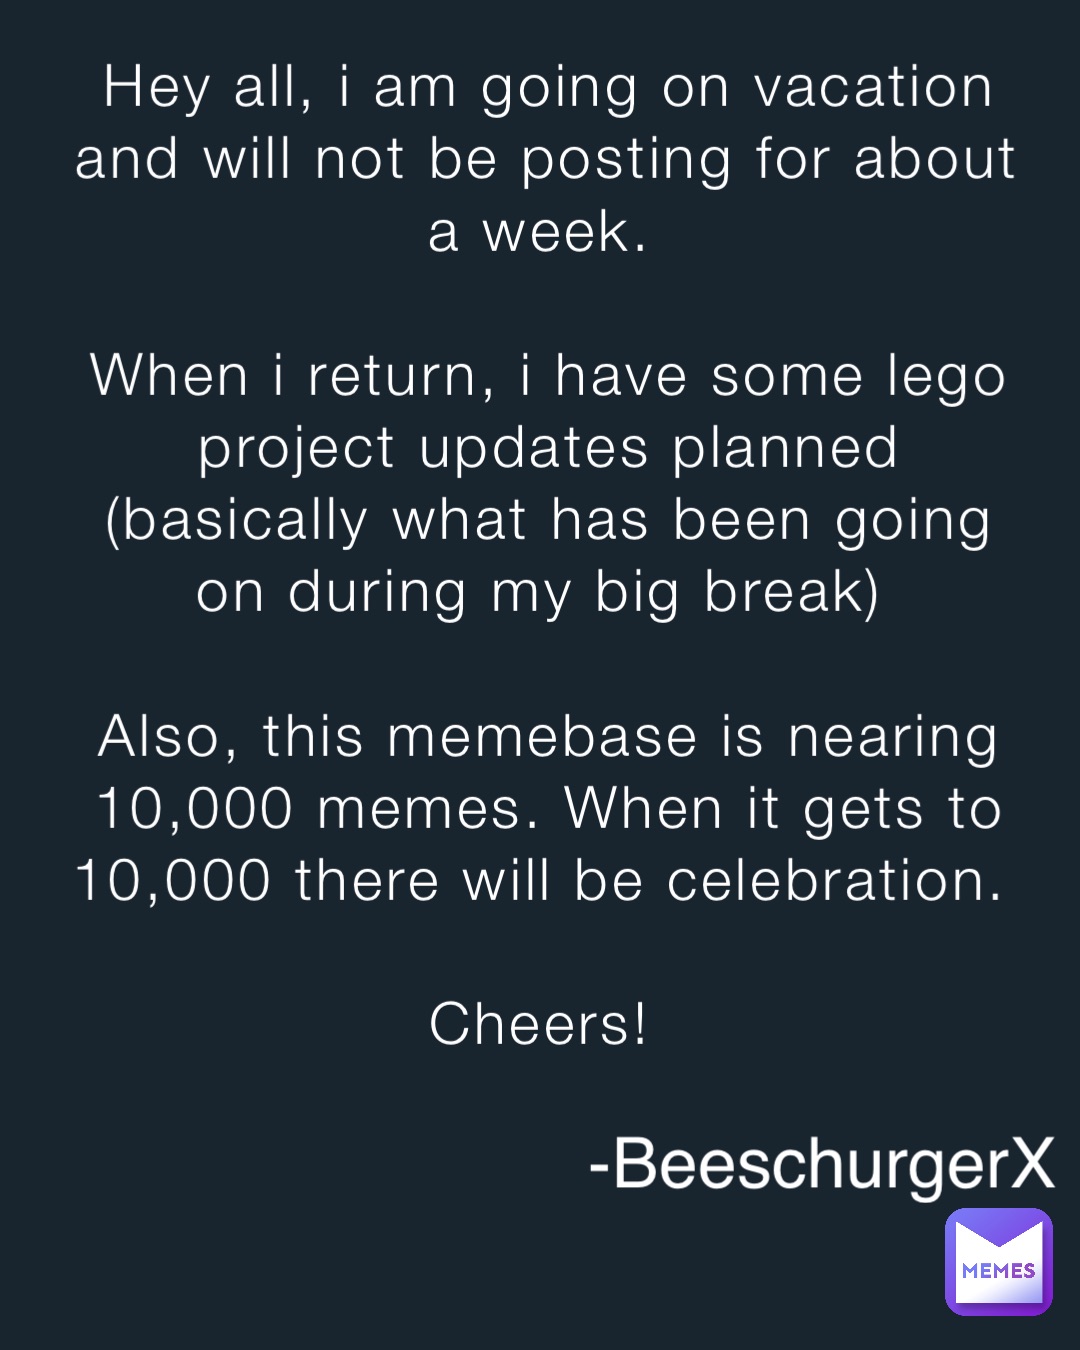 Hey all, i am going on vacation and will not be posting for about a week.

When i return, i have some lego project updates planned (basically what has been going on during my big break)

Also, this memebase is nearing 10,000 memes. When it gets to 10,000 there will be celebration.

Cheers! -BeeschurgerX